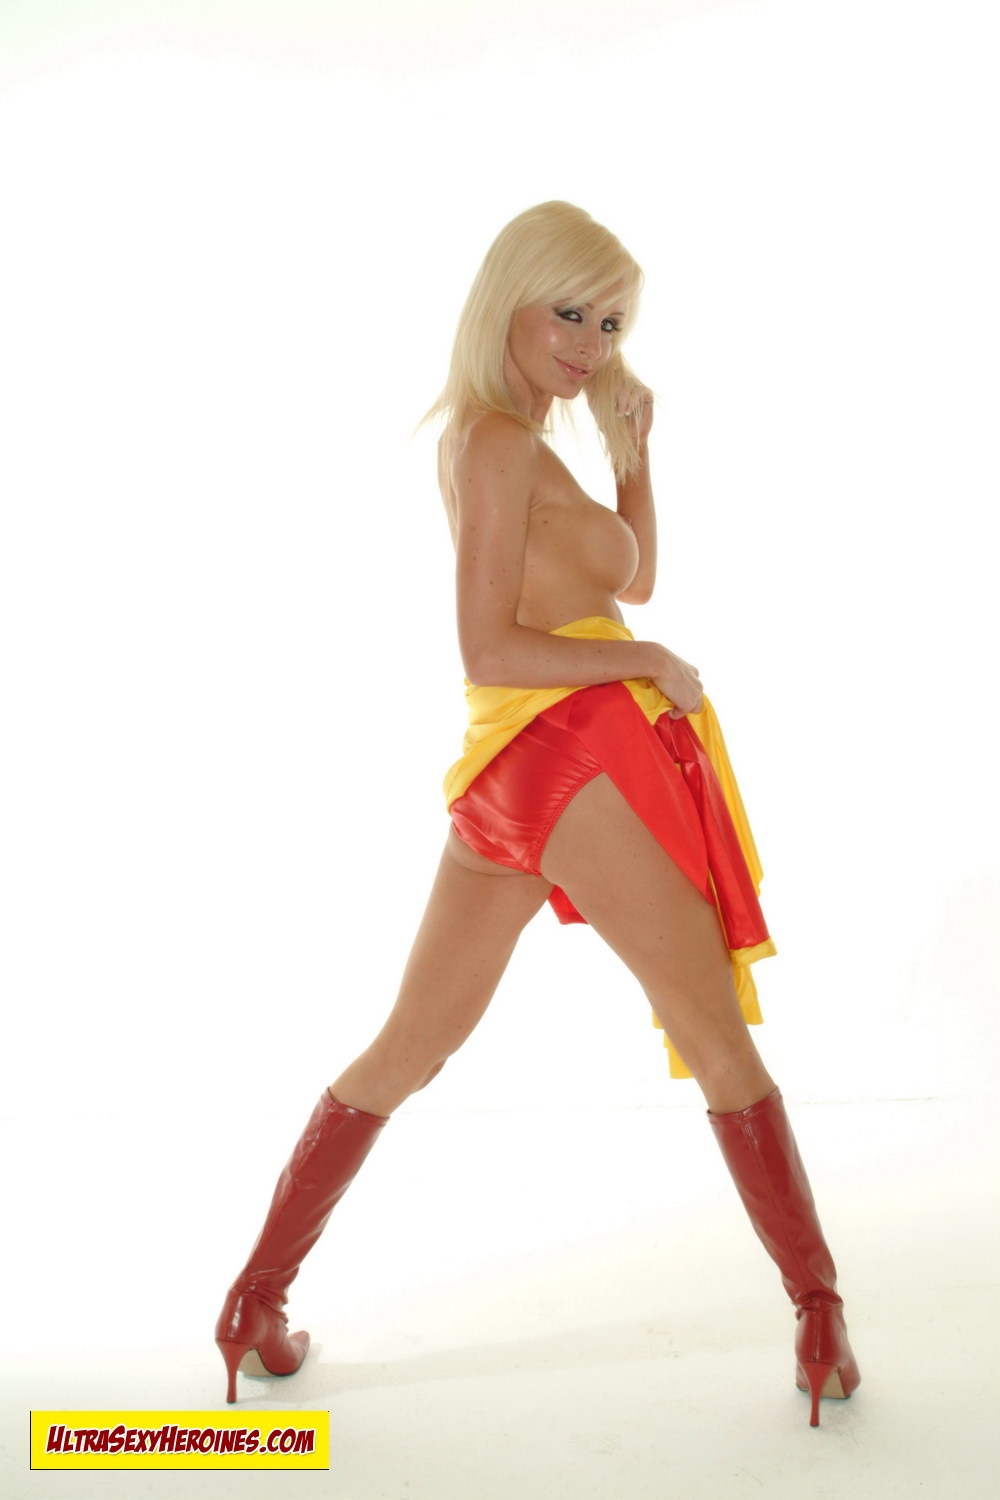 [UltraSexyHeroines] Sexy Blonde Super Heroine Cosplay Nude 170